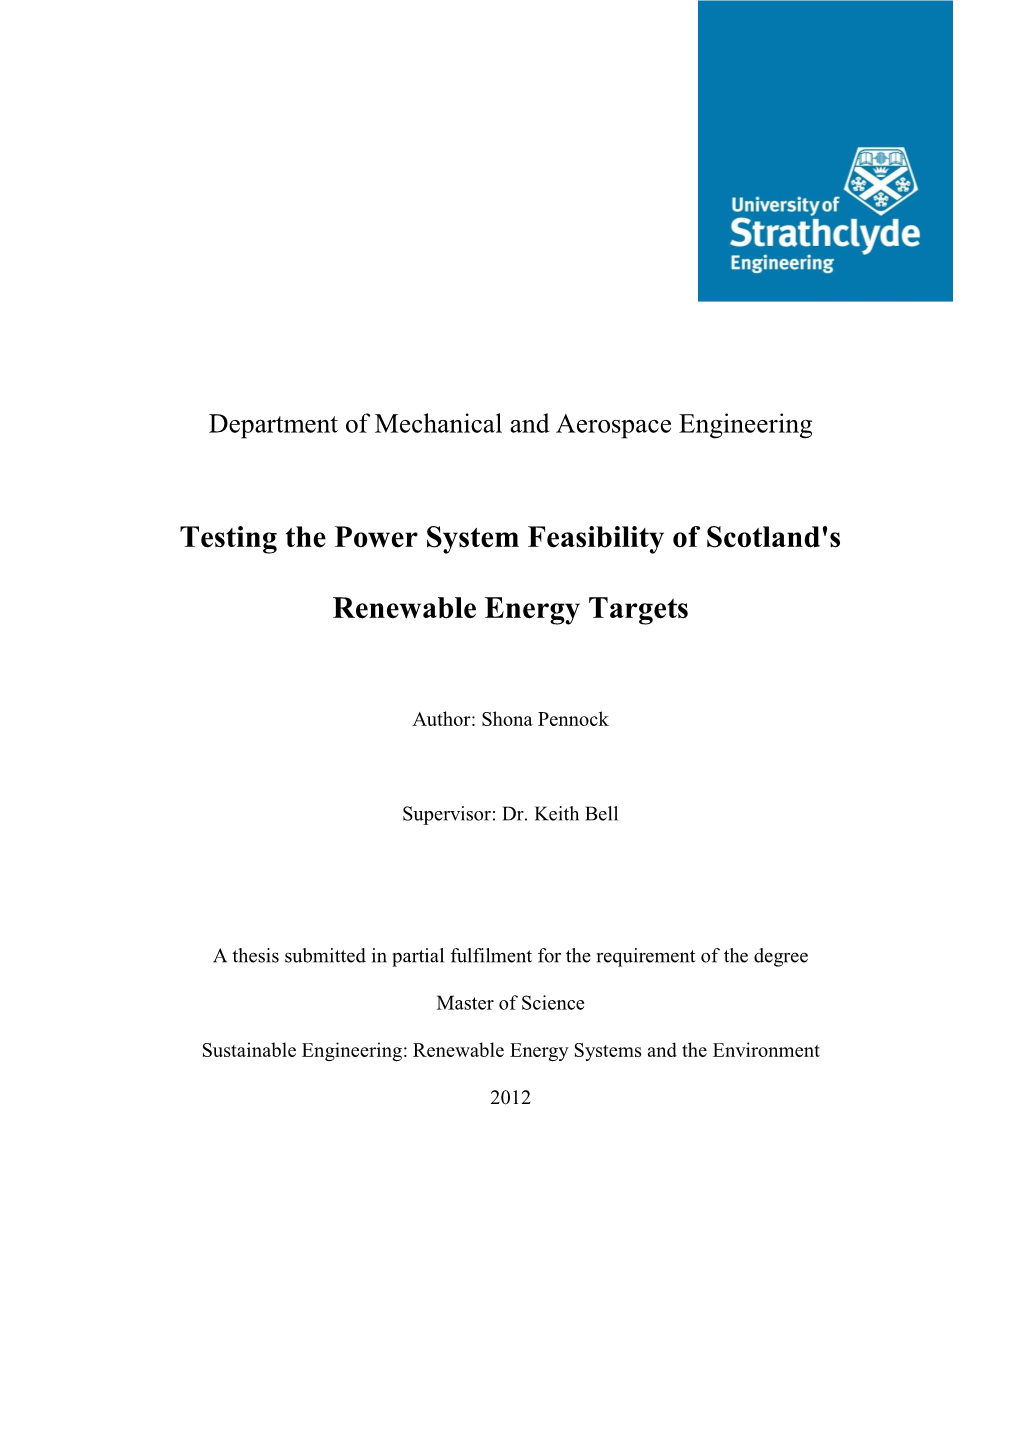 Testing the Power System Feasibility of Scotland's Renewable Energy